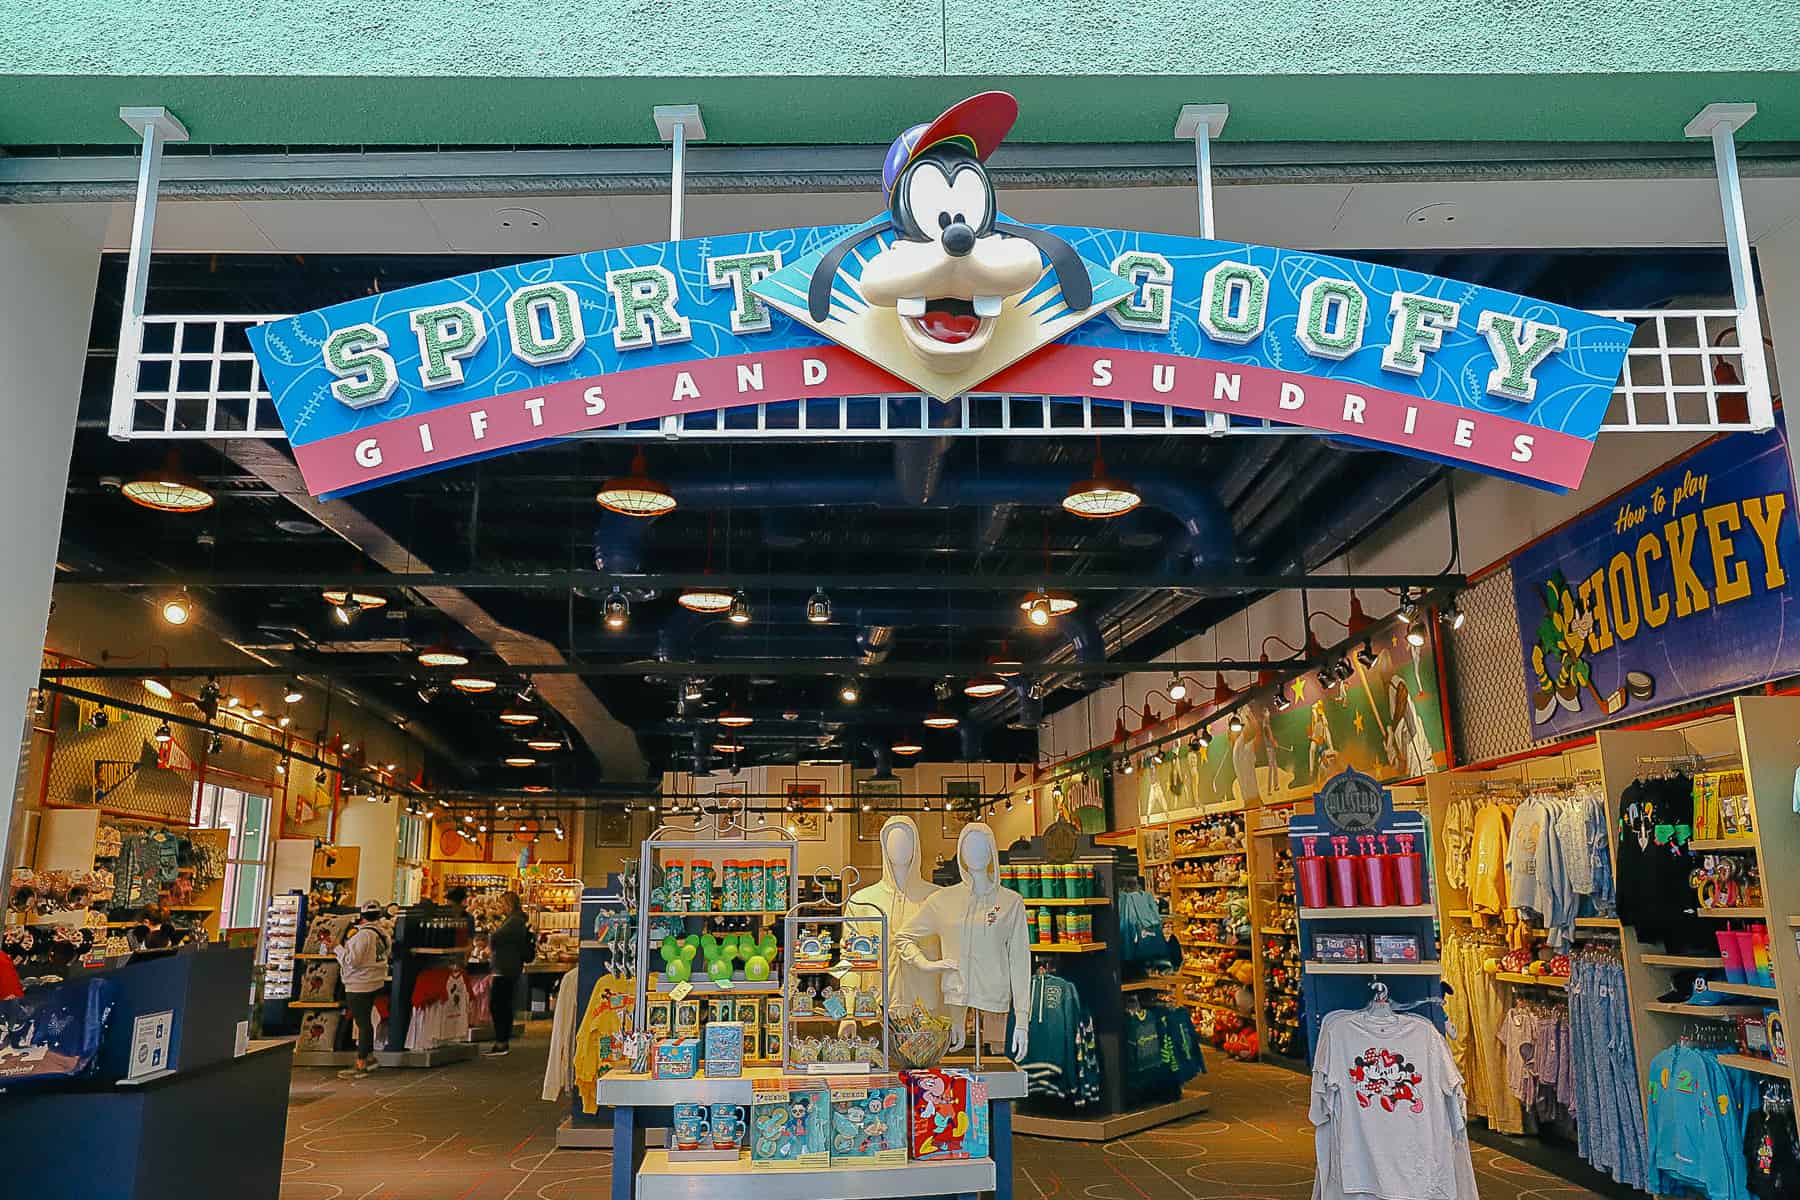 Sport Goofy Gifts and Sundries (The Gift Shop at All-Star Sports)